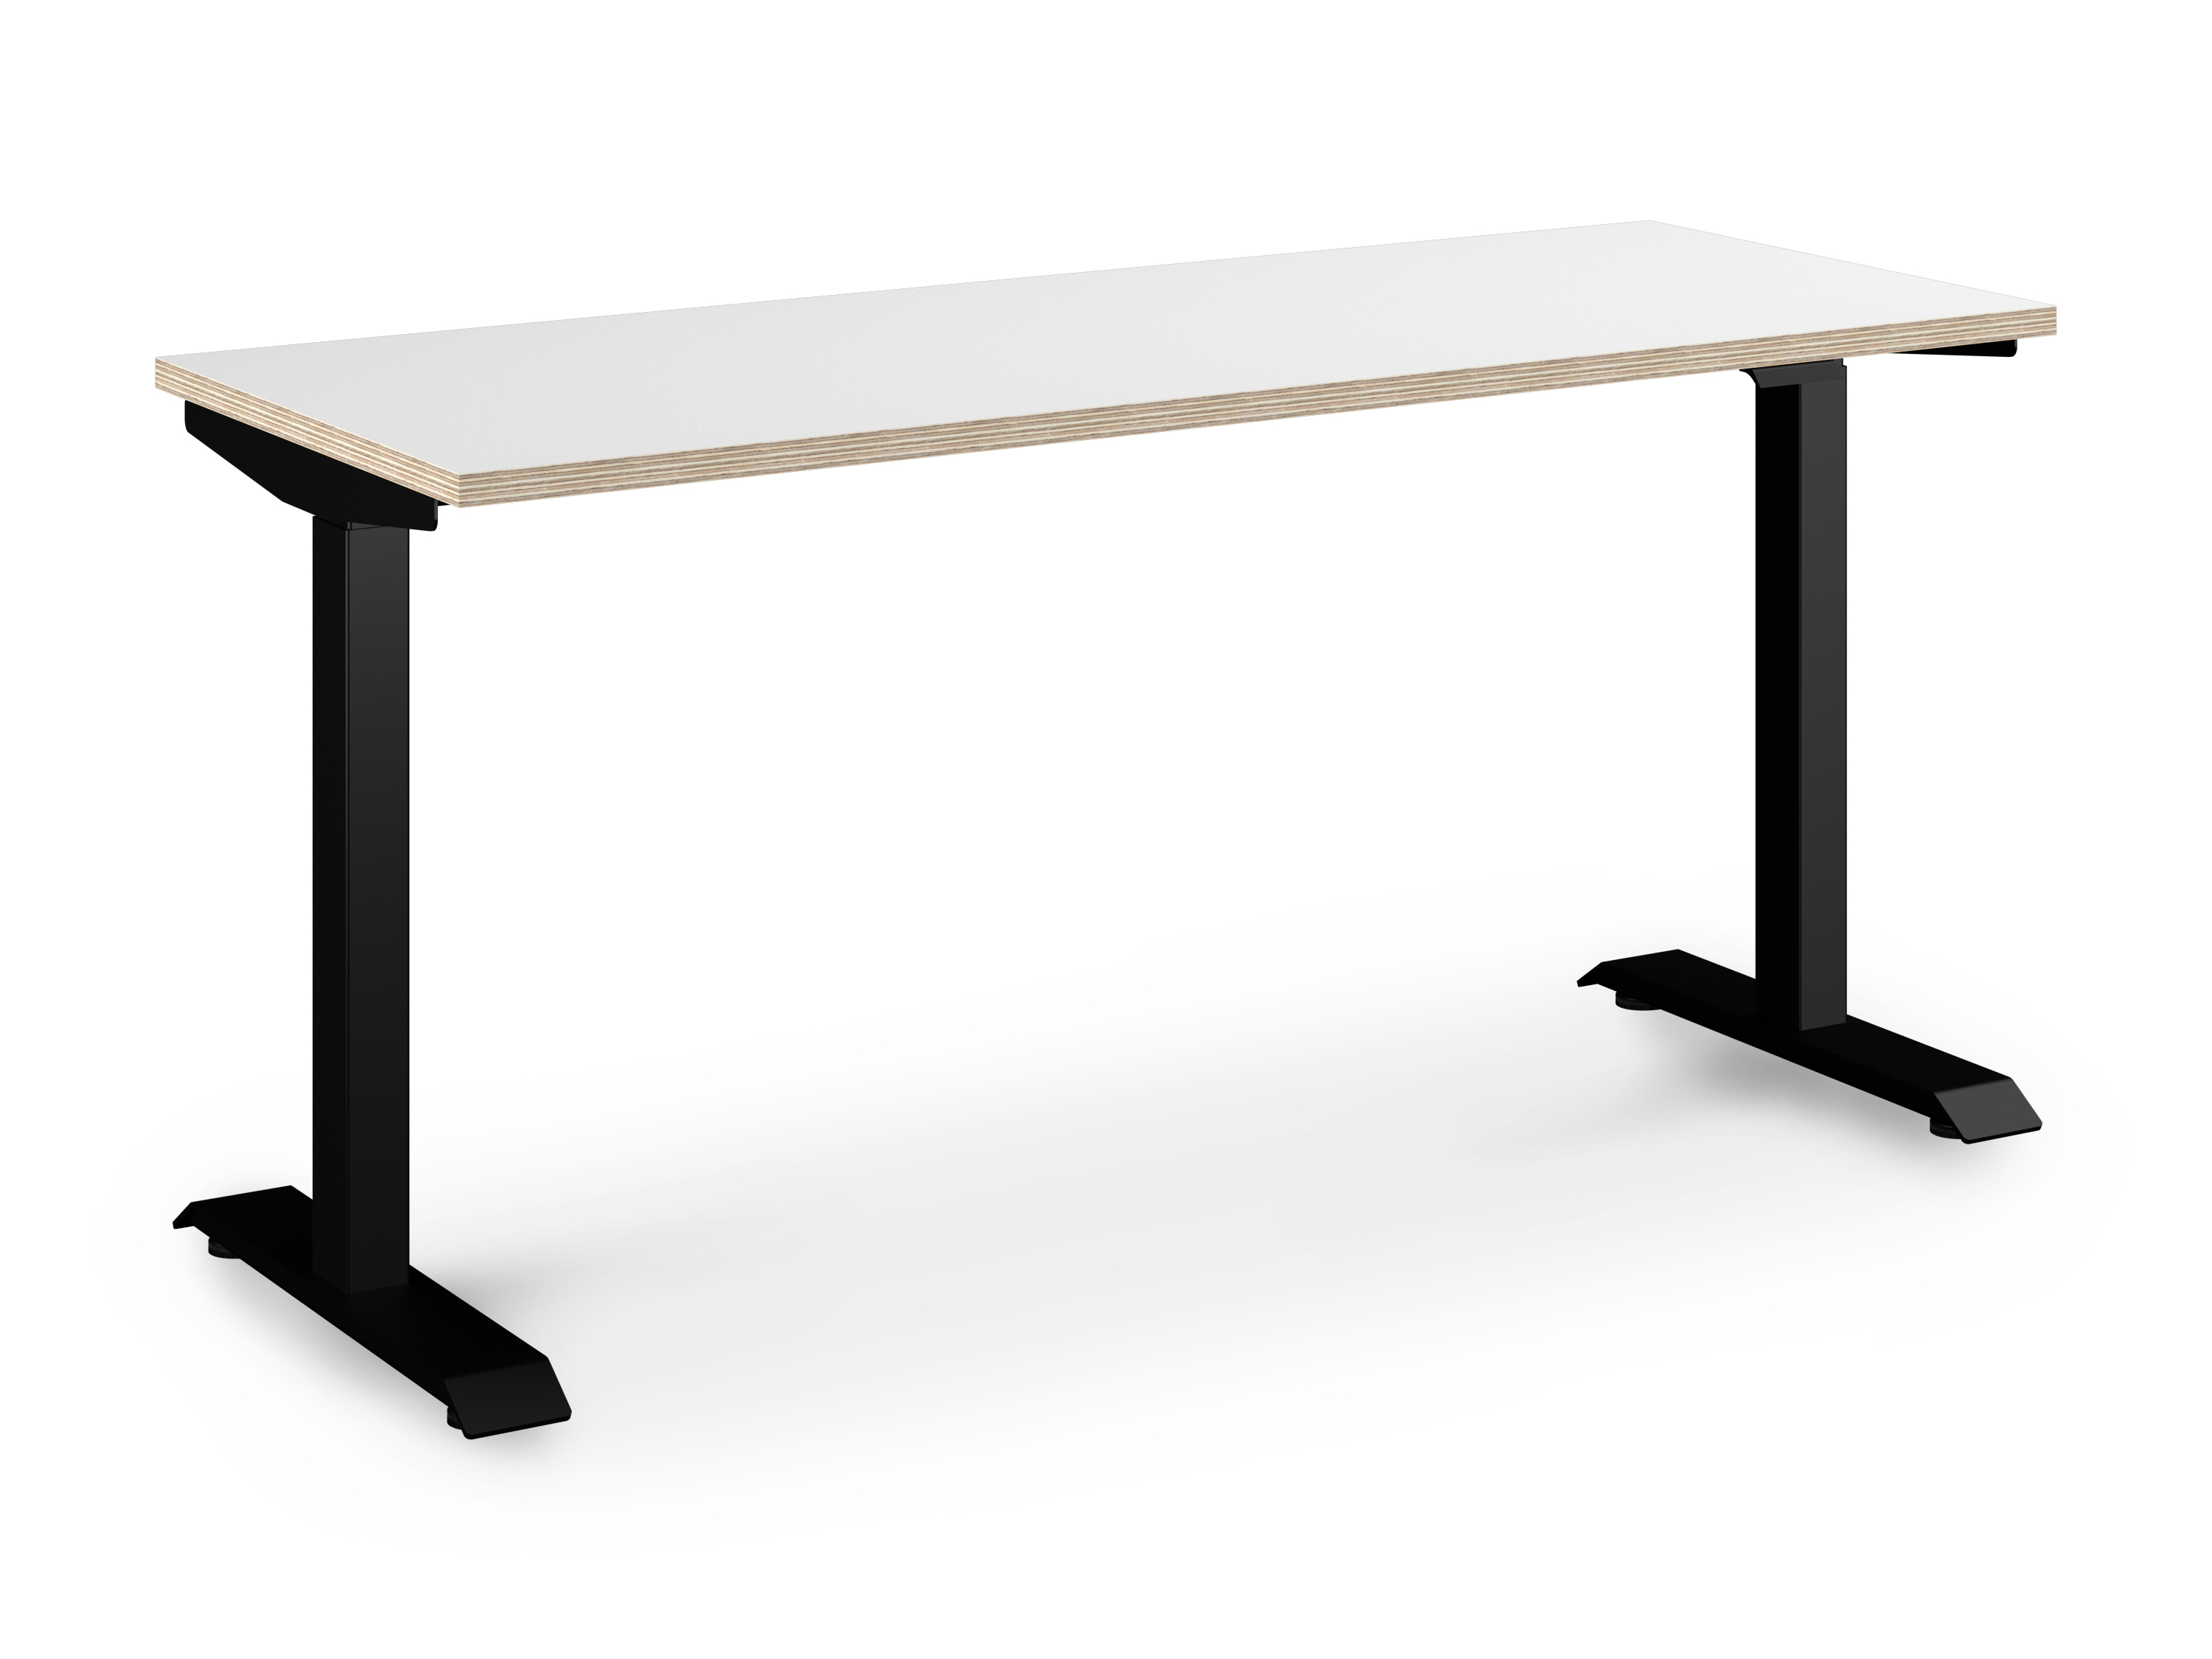 WS - Sit Stand Solo - Black Frame, White ply edging